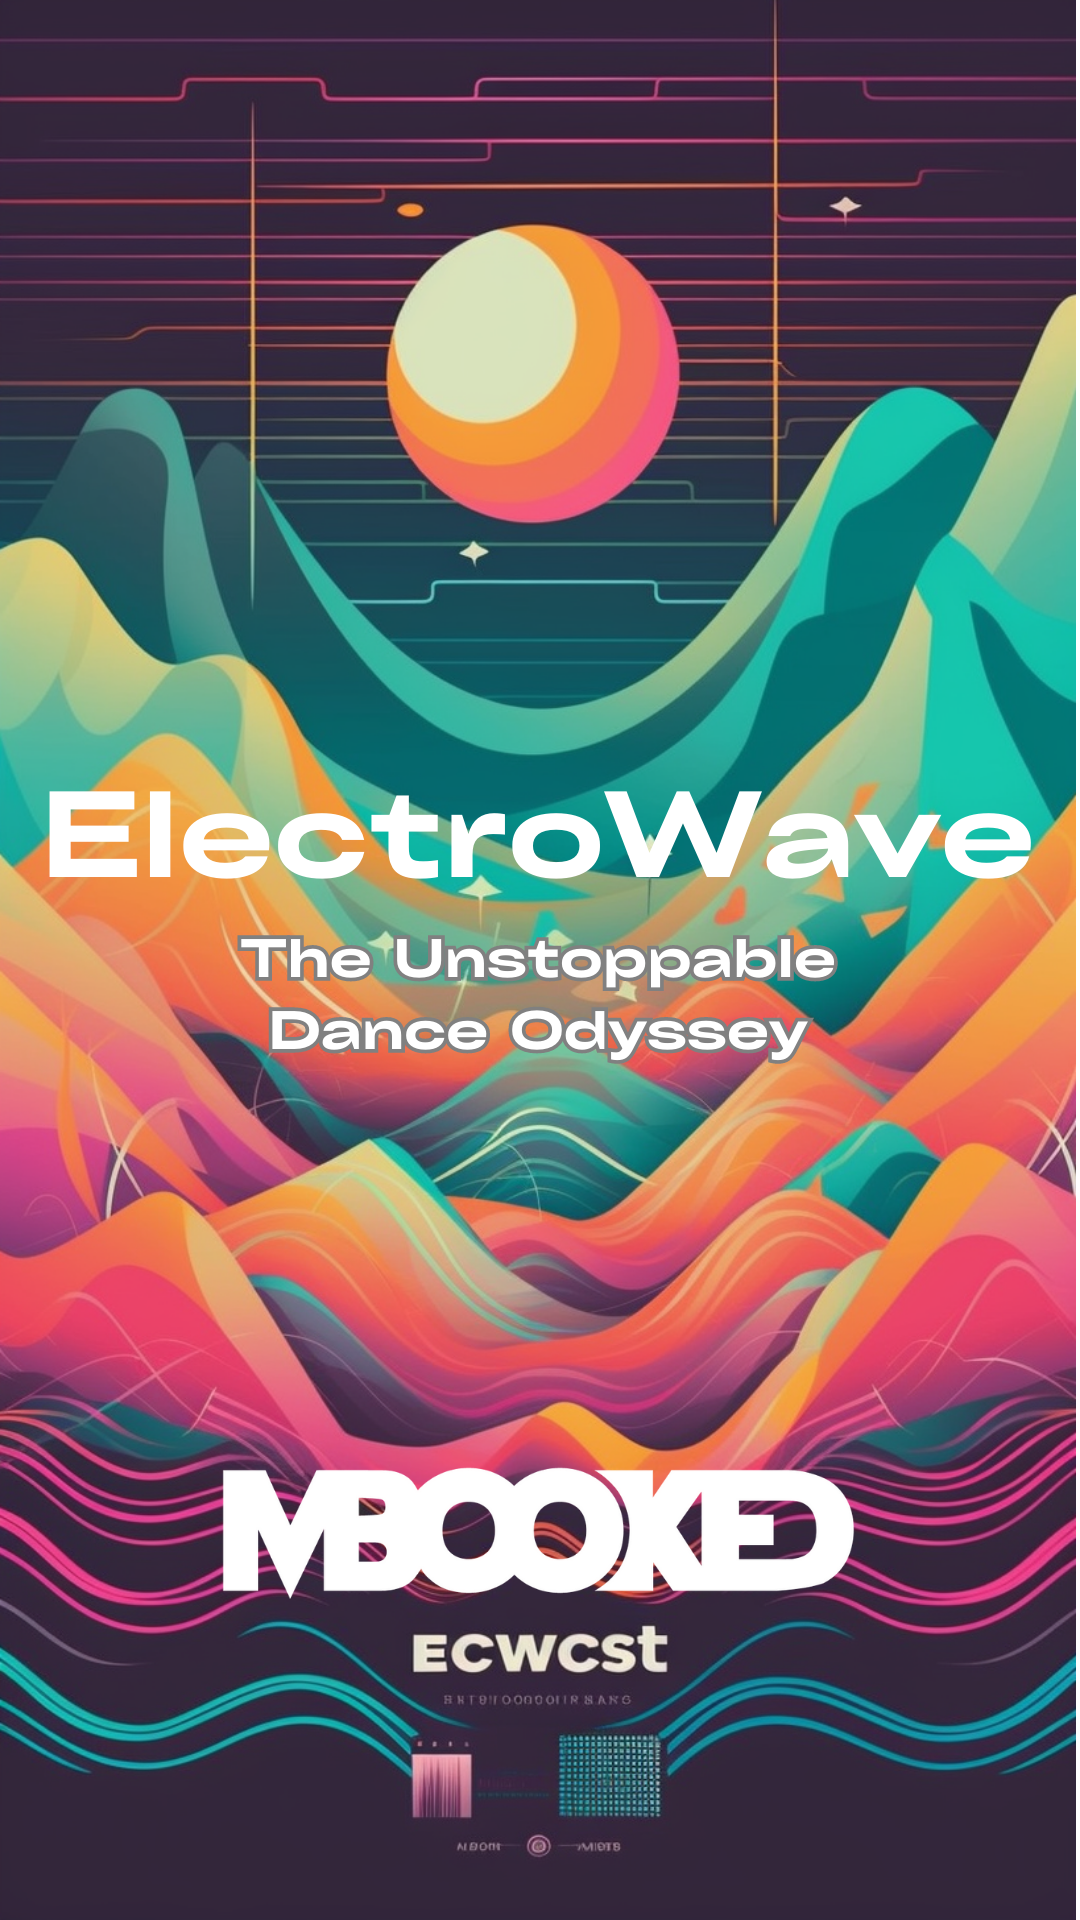 mBooked.com, ElectroWave: The Unstoppable Dance Odyssey, Dublin